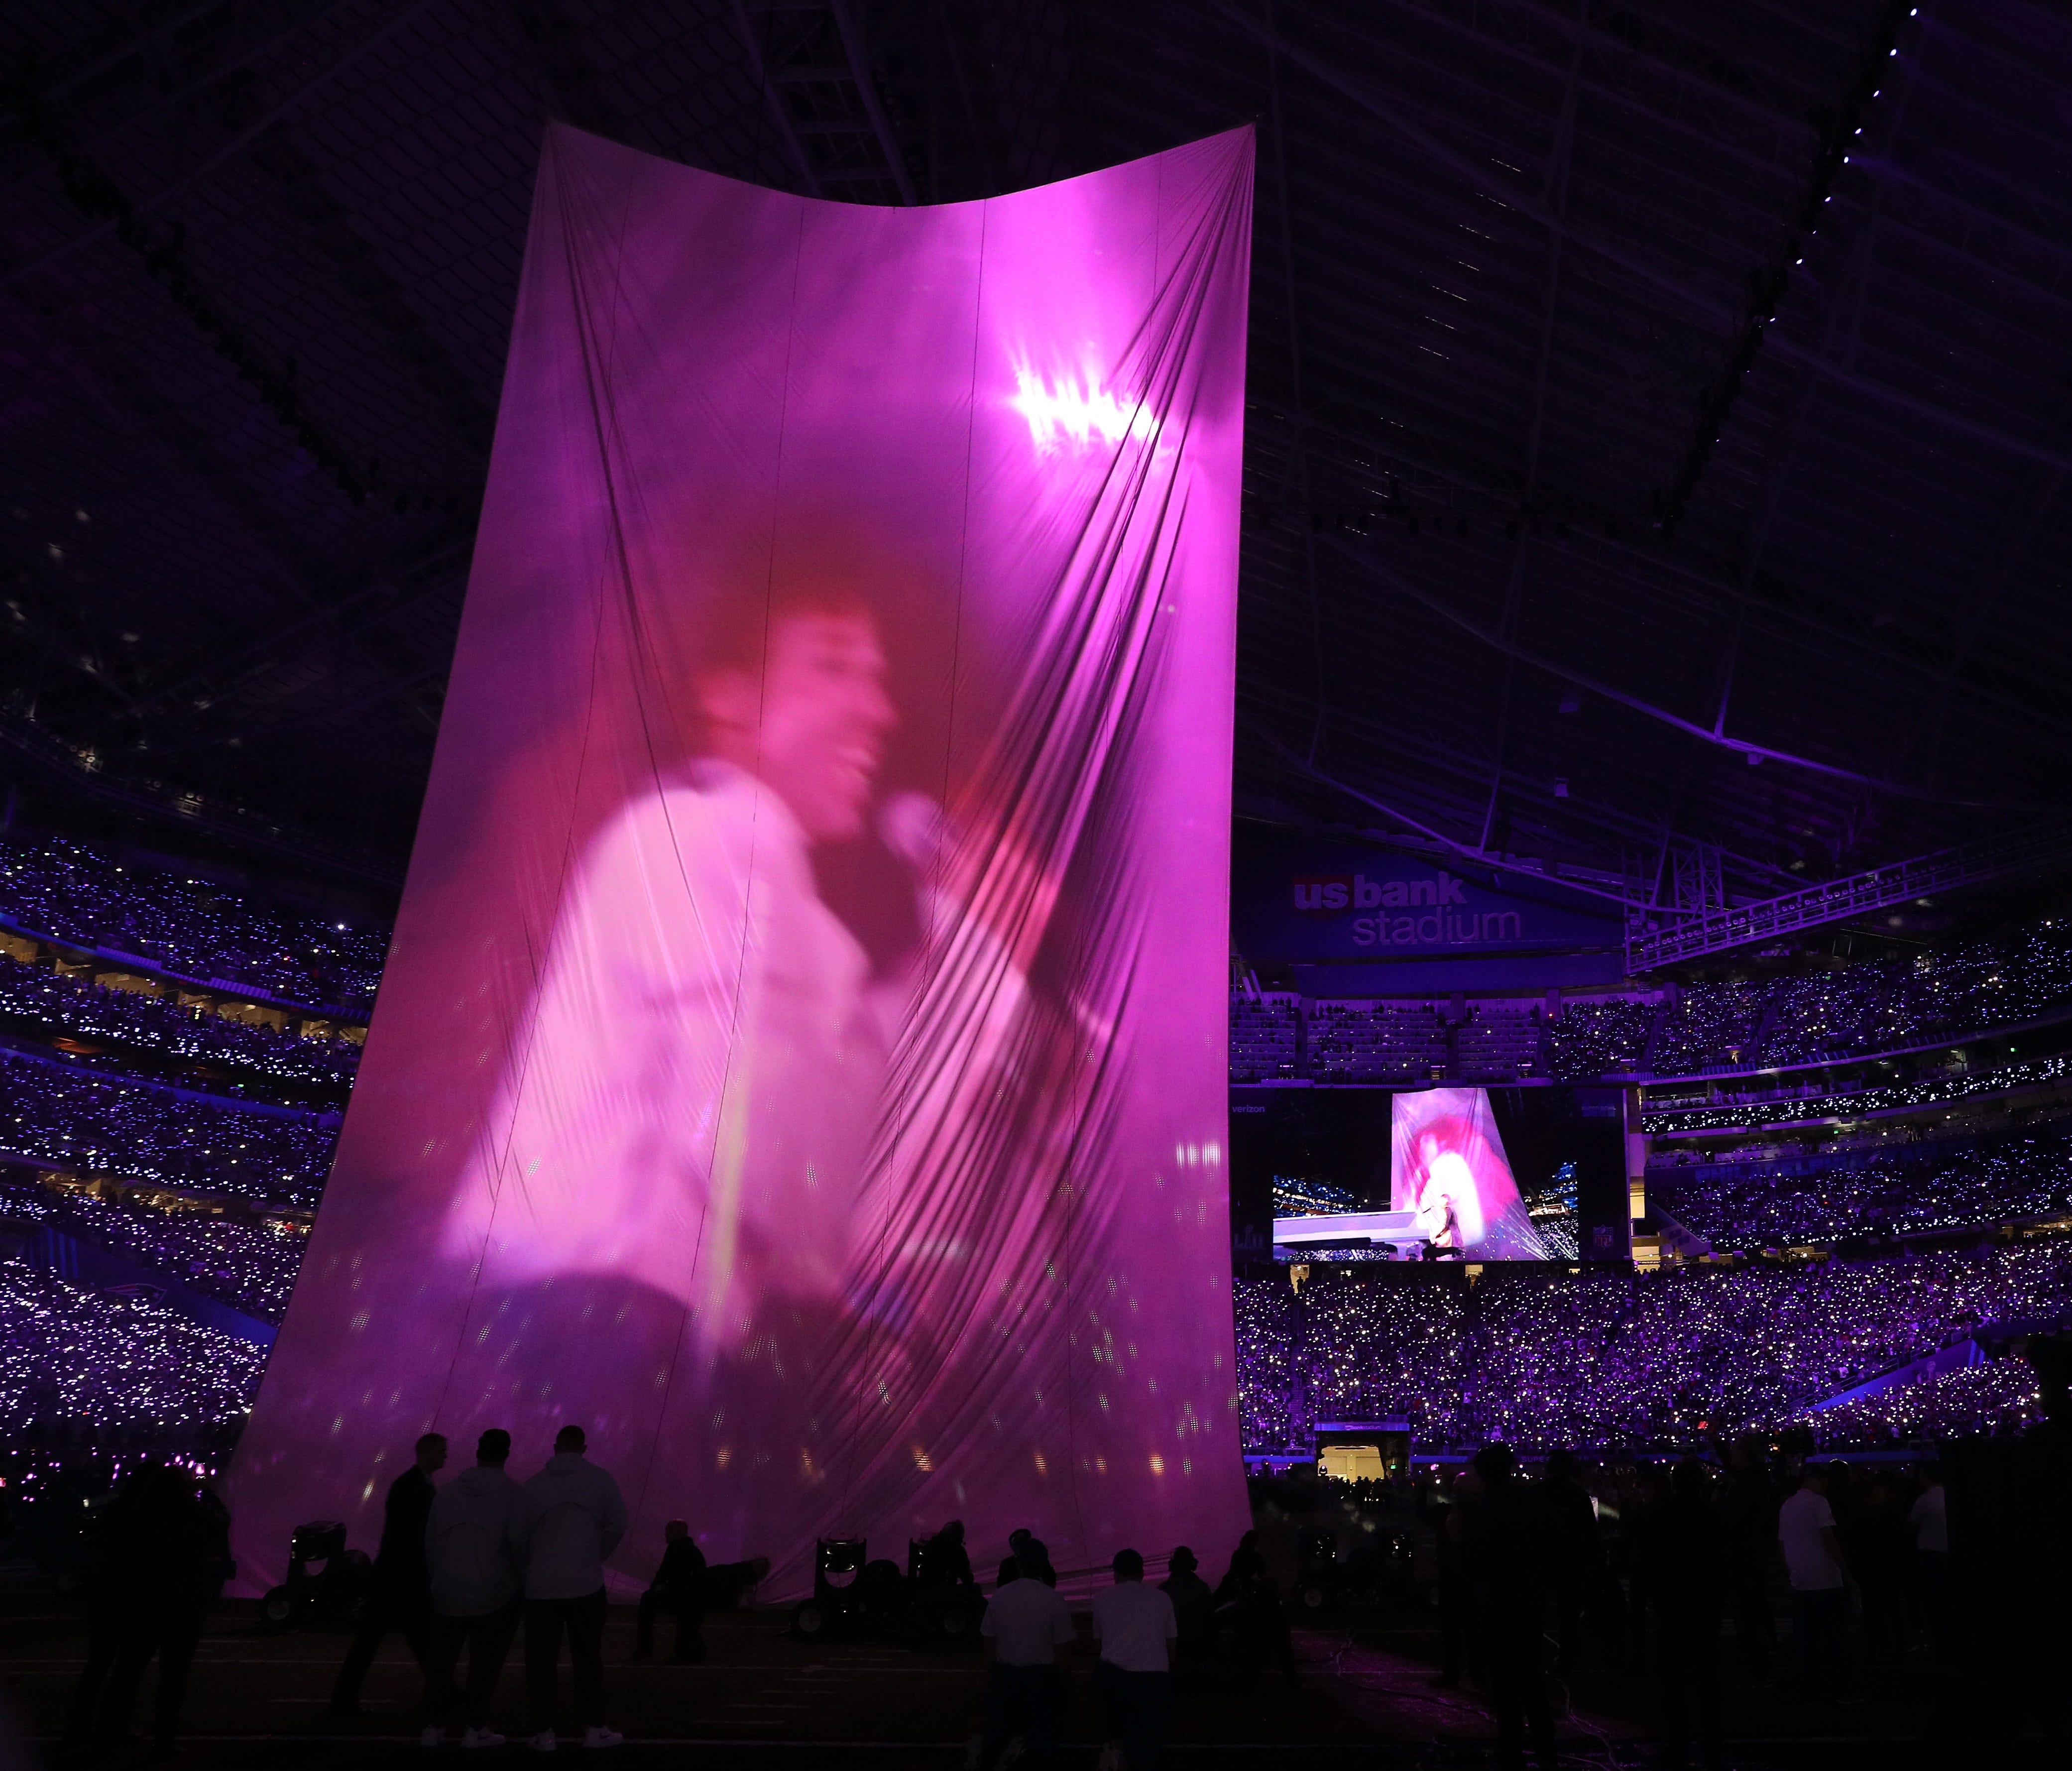 Justin Timberlake performs with Prince in the background during the Pepsi Super Bowl LII Halftime Show at U.S. Bank Stadium on Feb. 4, 2018, in Minneapolis.